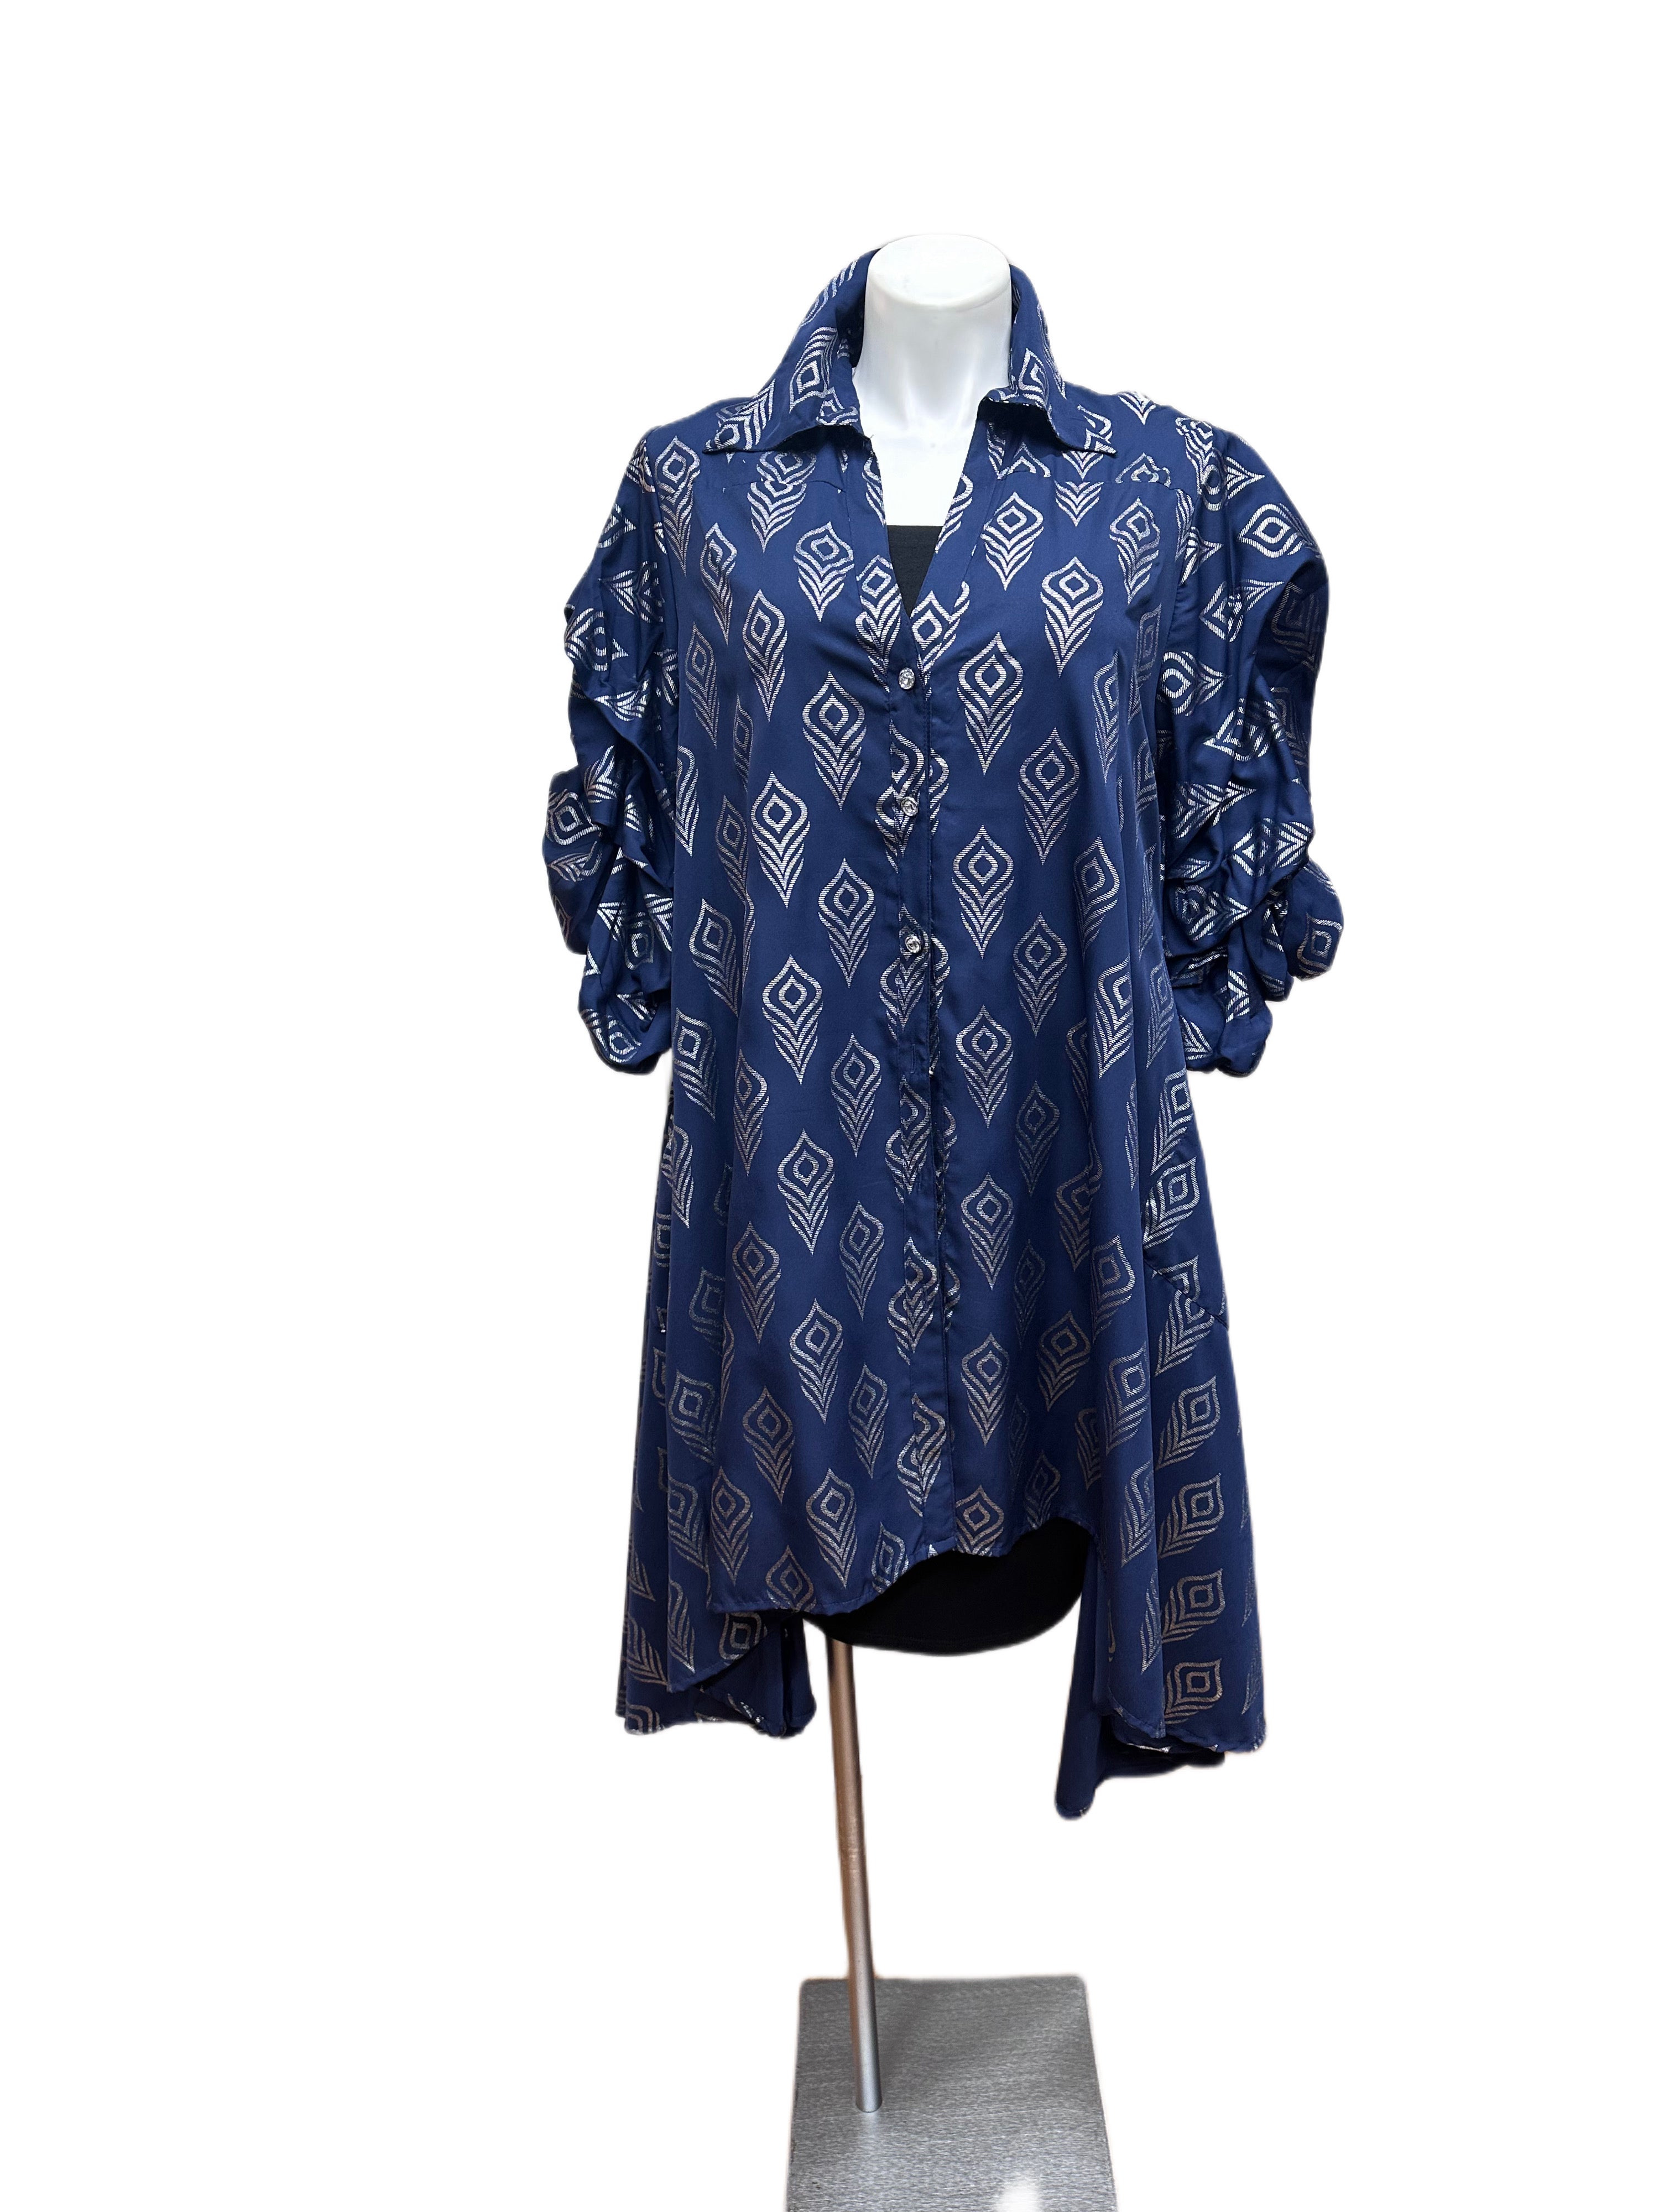 Puff Sleeve Navy with Silver Print Tunic Dress